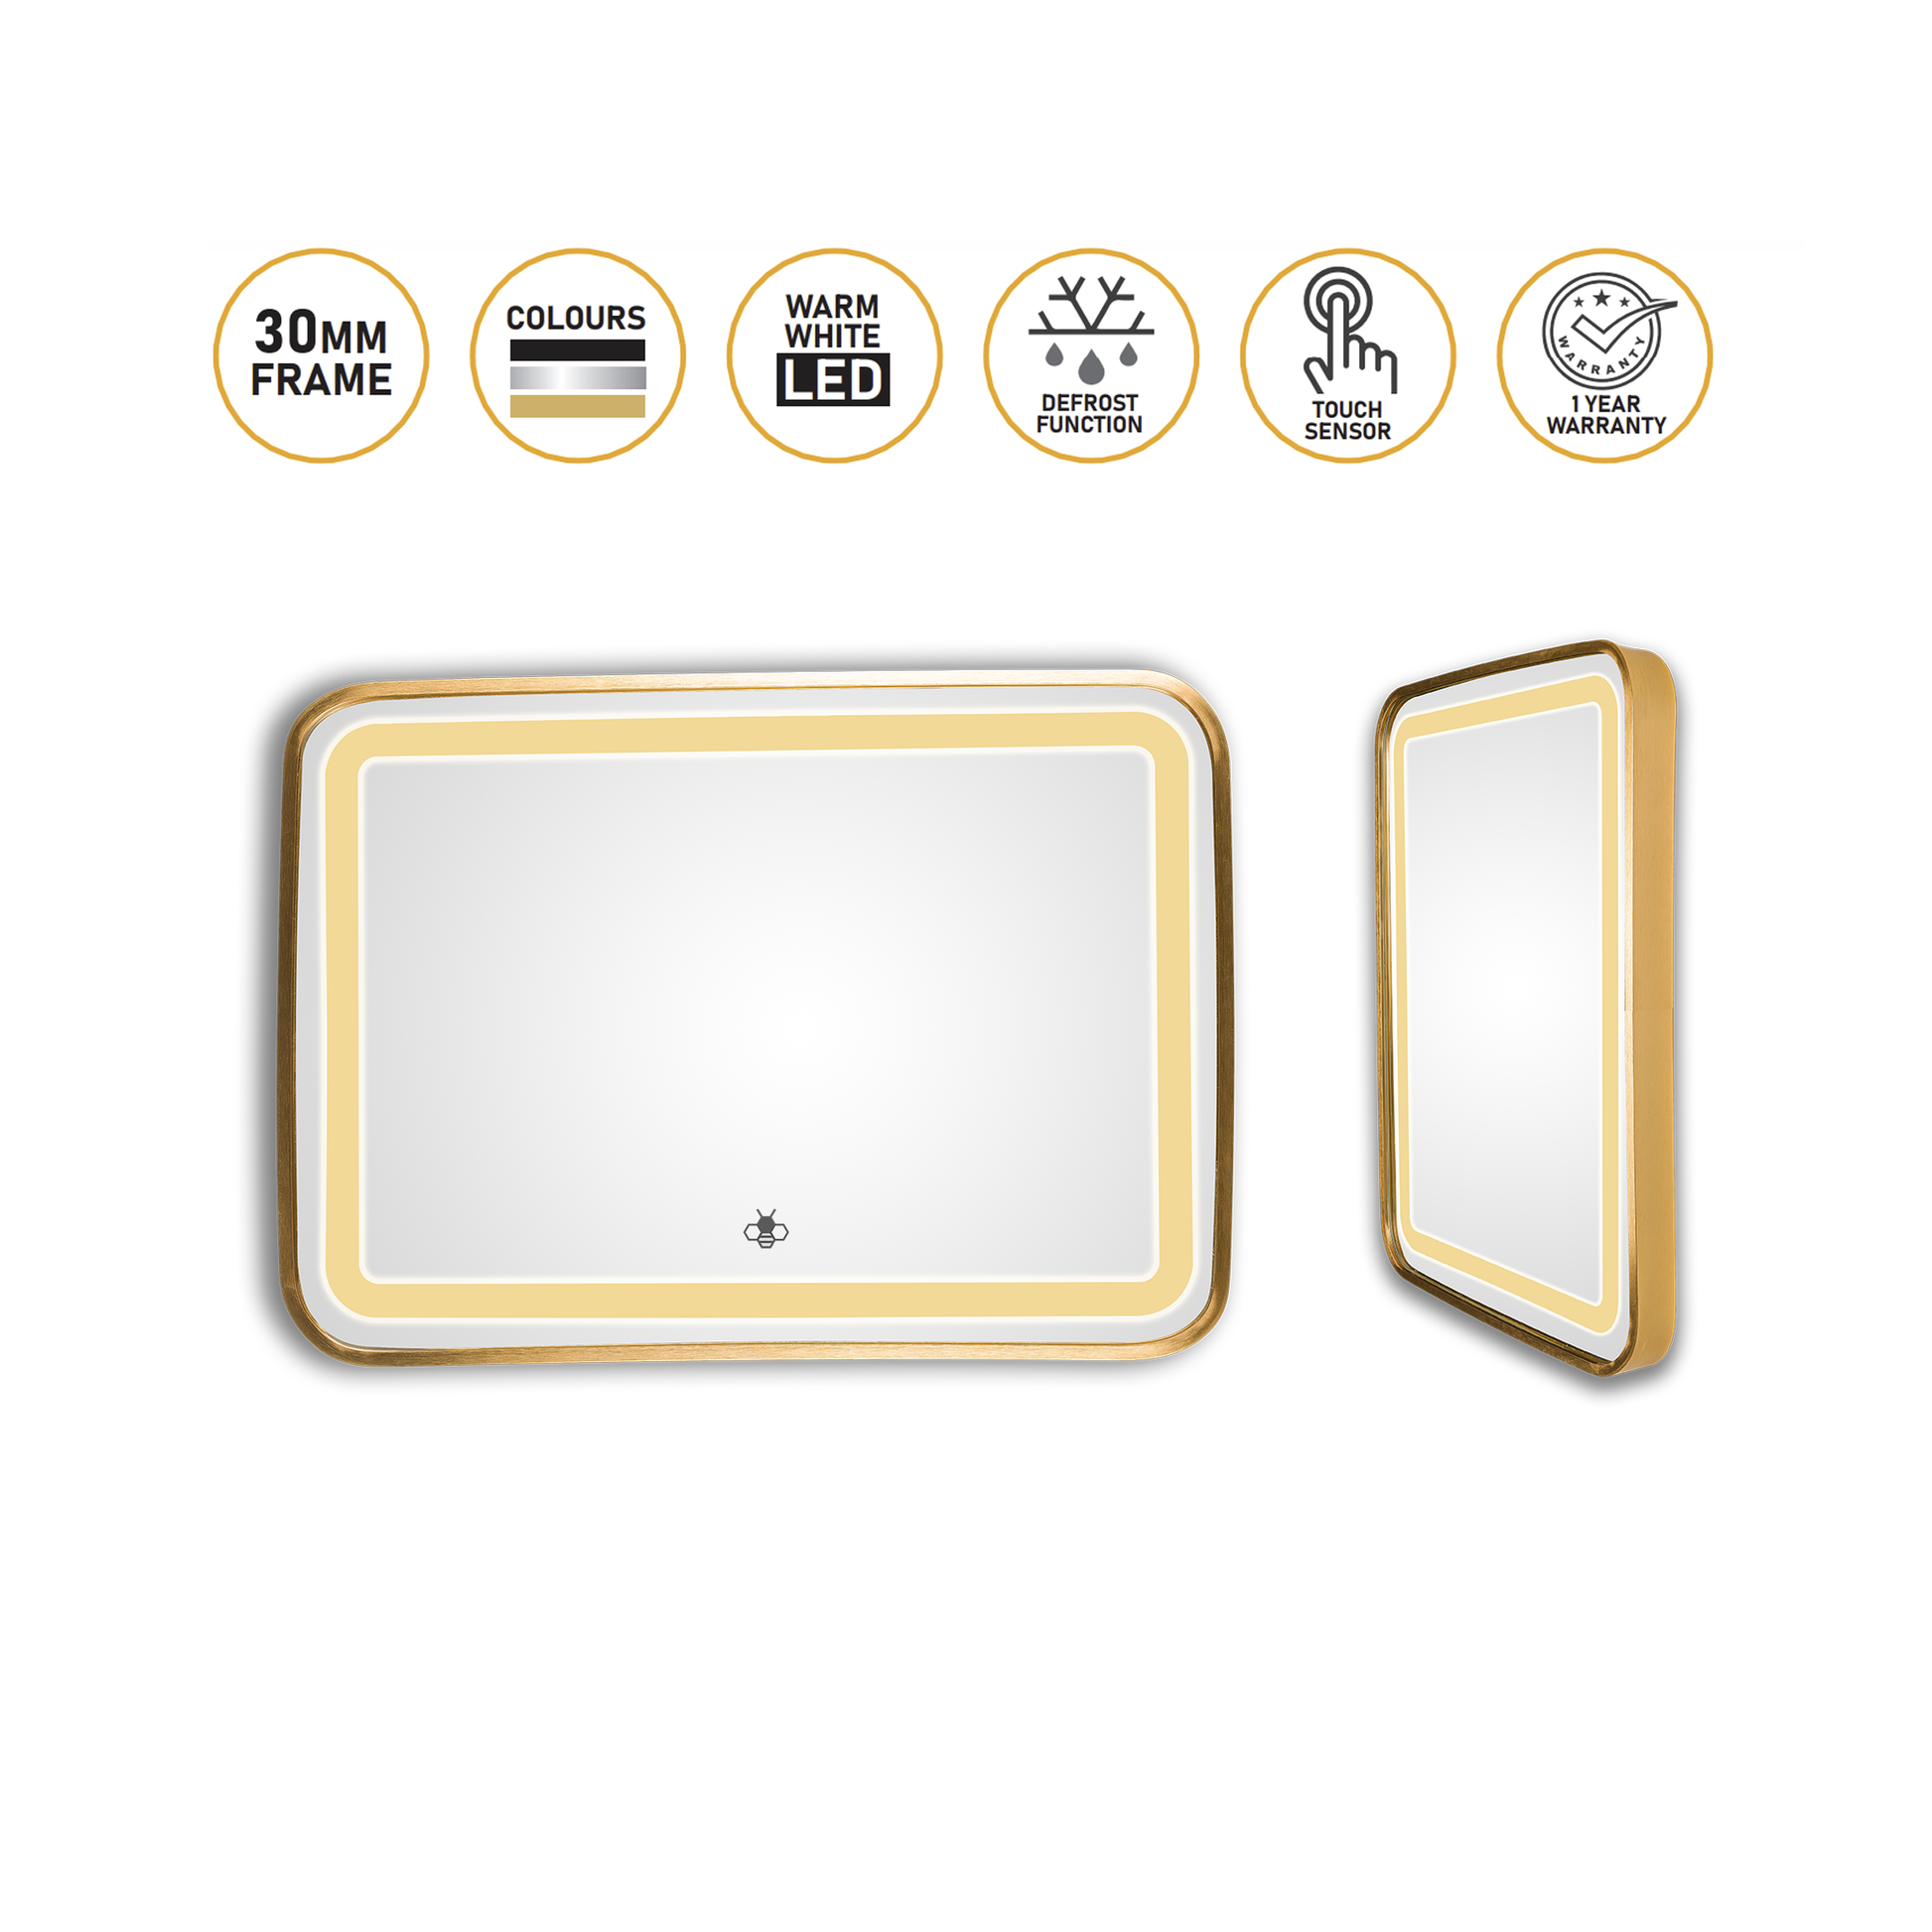 fcced75a-7d31-4334-b046-8ac1f94f716d/Rectangle_Horizontal_30_gold_features.png